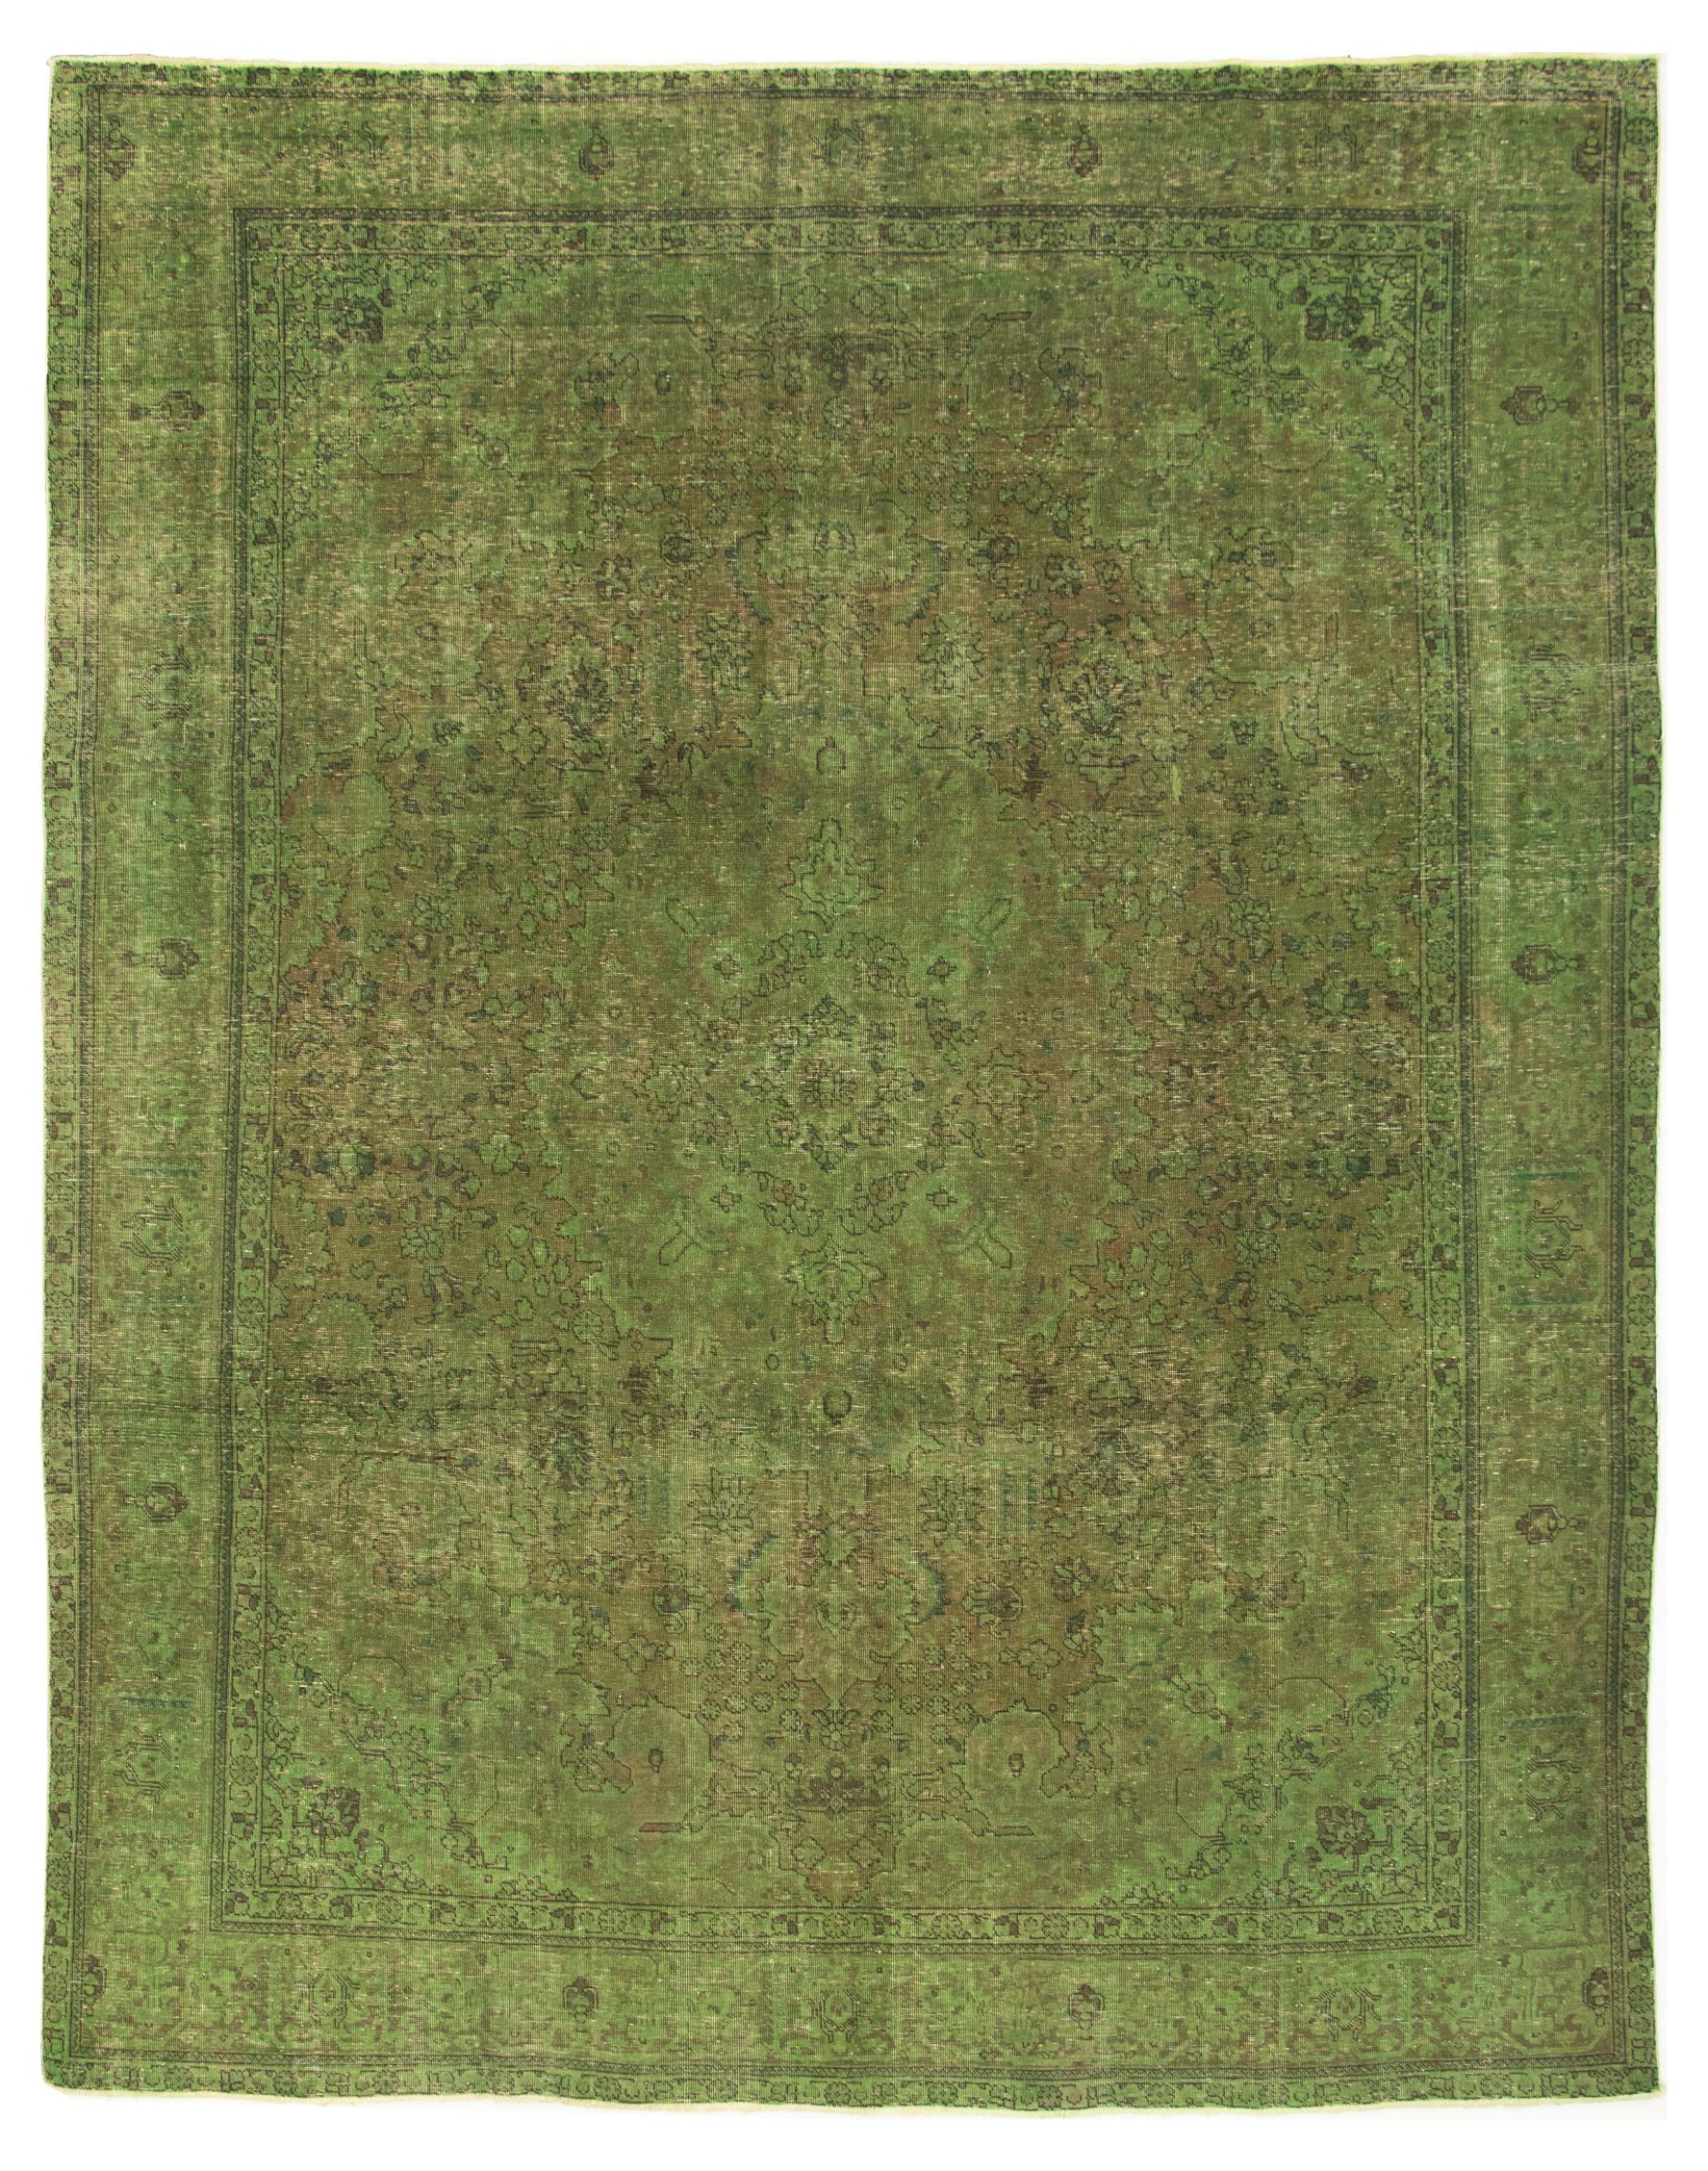 Hand-knotted Color Transition Green Wool Rug 9'10" x 12'6" Size: 9'10" x 12'6"  